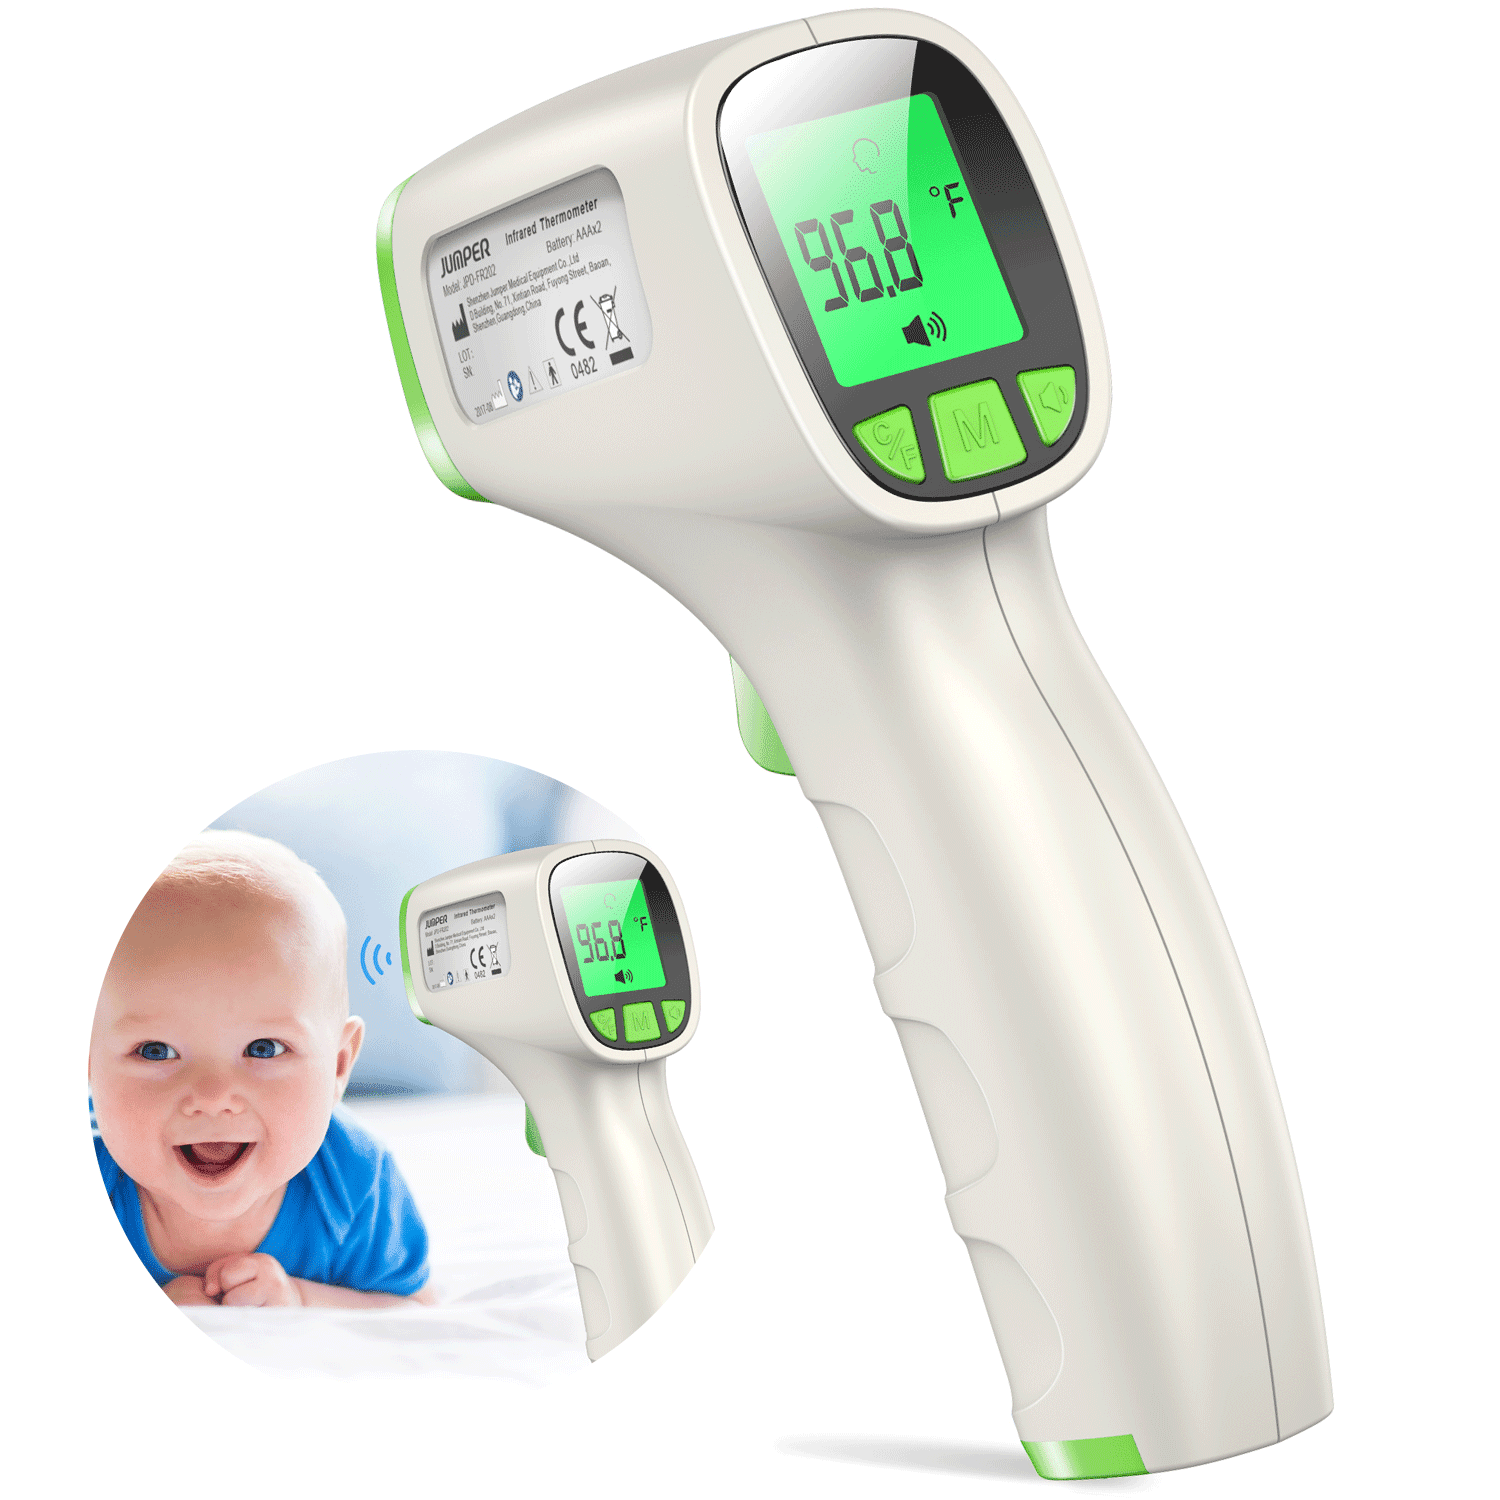 Digital Infrared Thermometer Non-Contact,Professional Precision Digital Thermometer for Baby Kids,˚C Fast Delivery Forehead Thermometer for Adults ˚F Adjustable with Fever Alert 